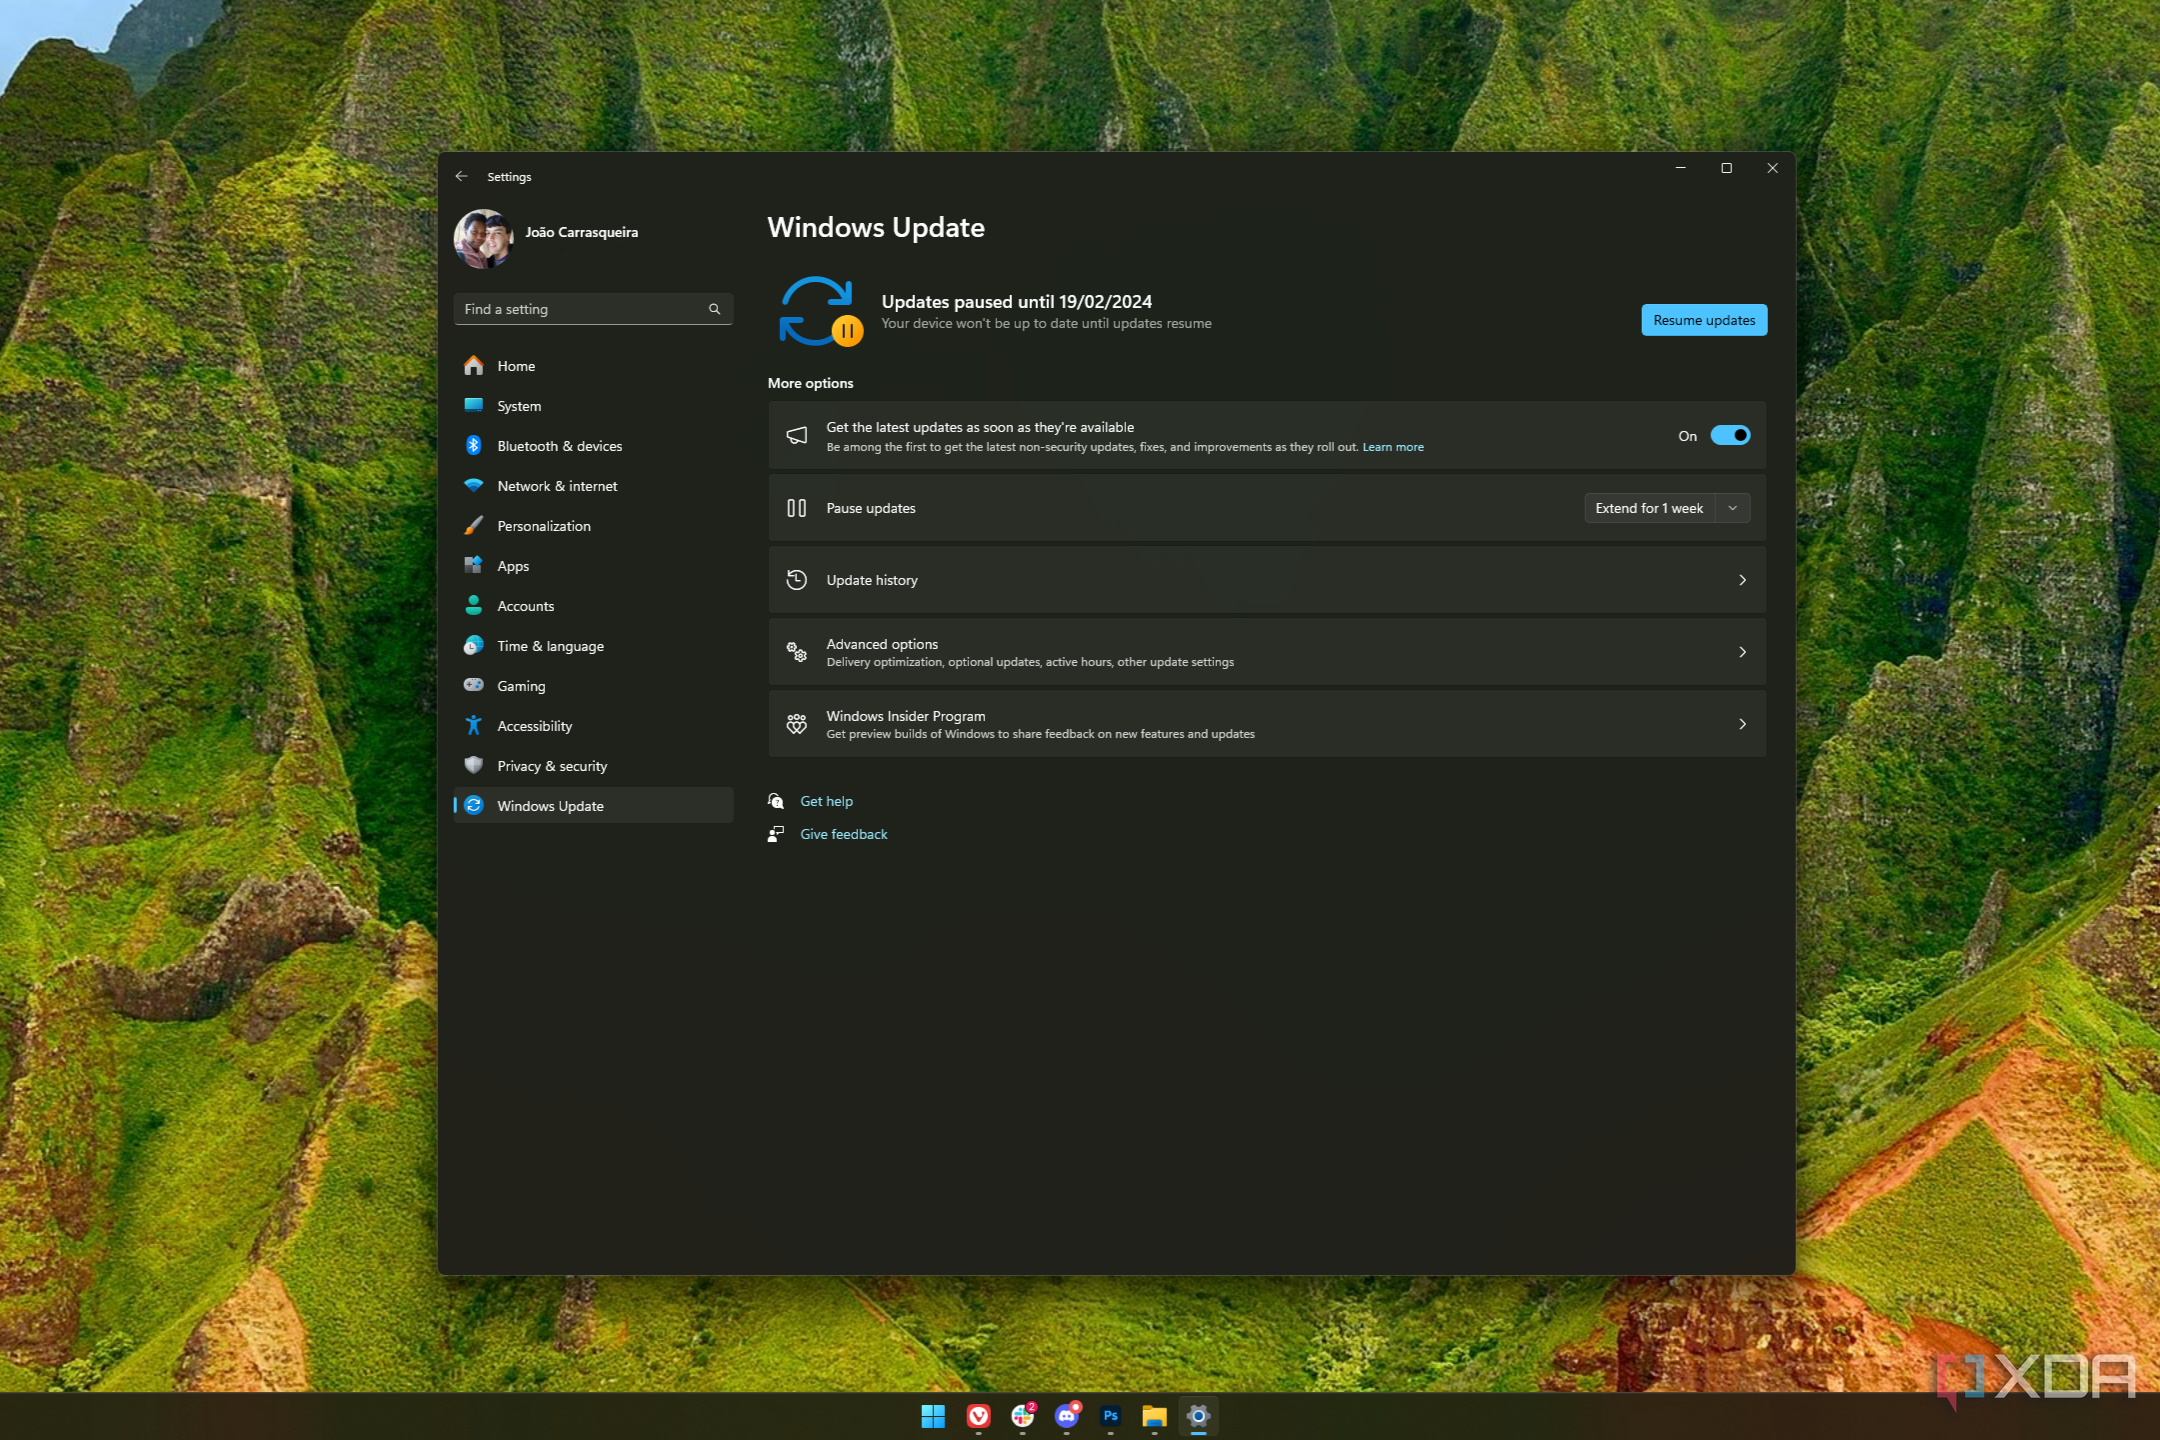 Screenshot of a Windows 11 desktop with the Windows Update page showing updates are paused